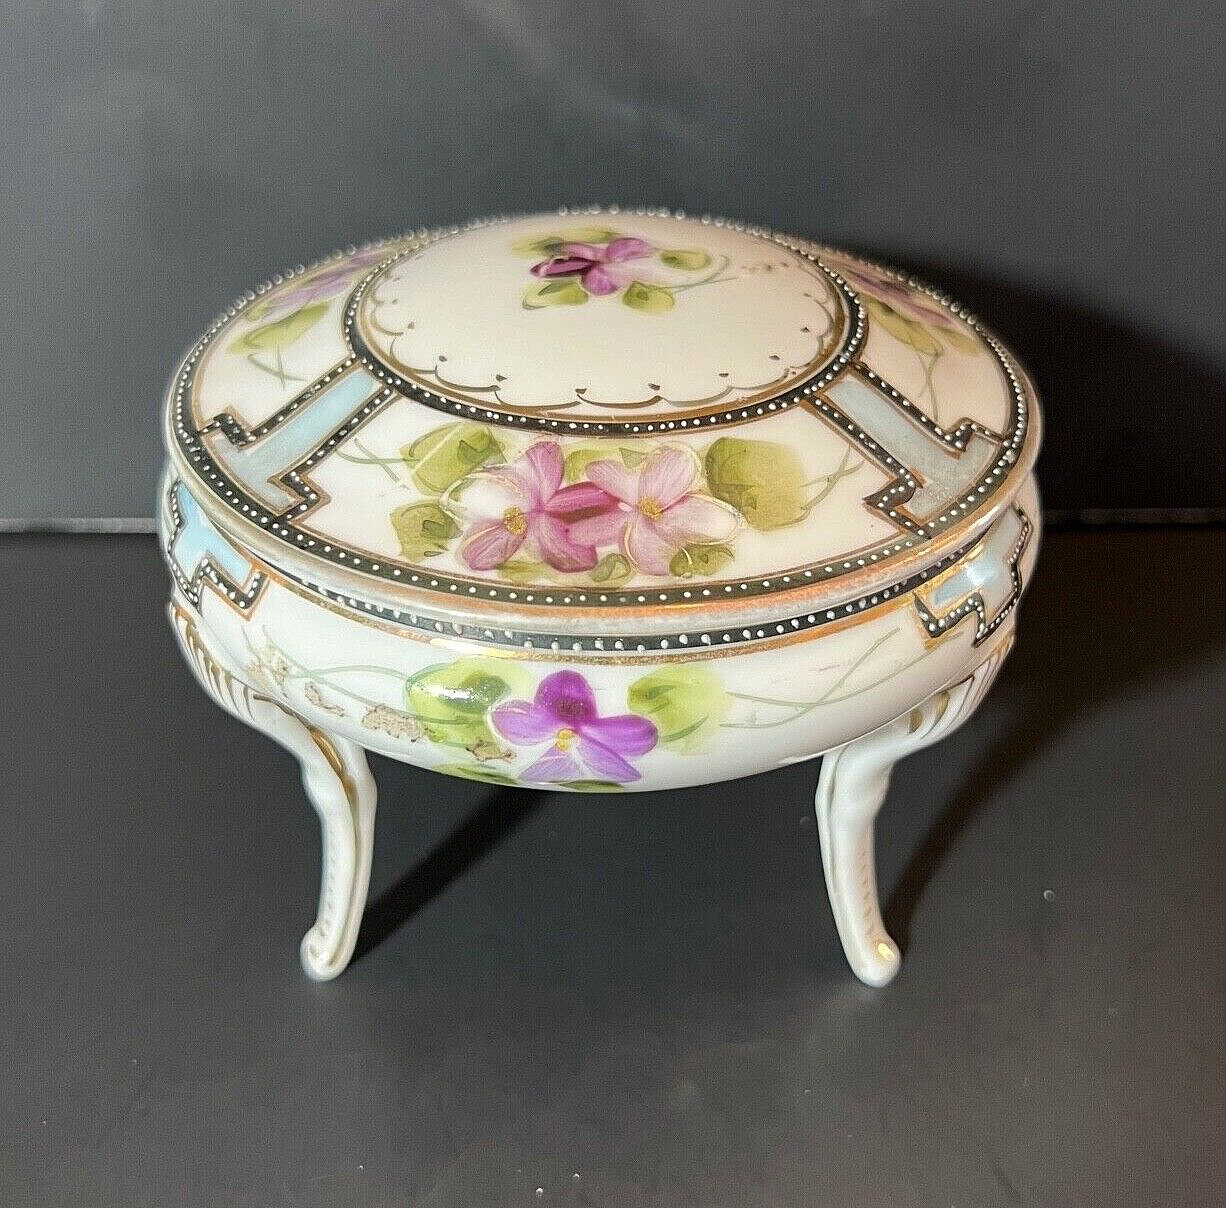 Antique Nippon Morimura Footed Vanity Dresser Dish 1910-11 Hand Painted Violets